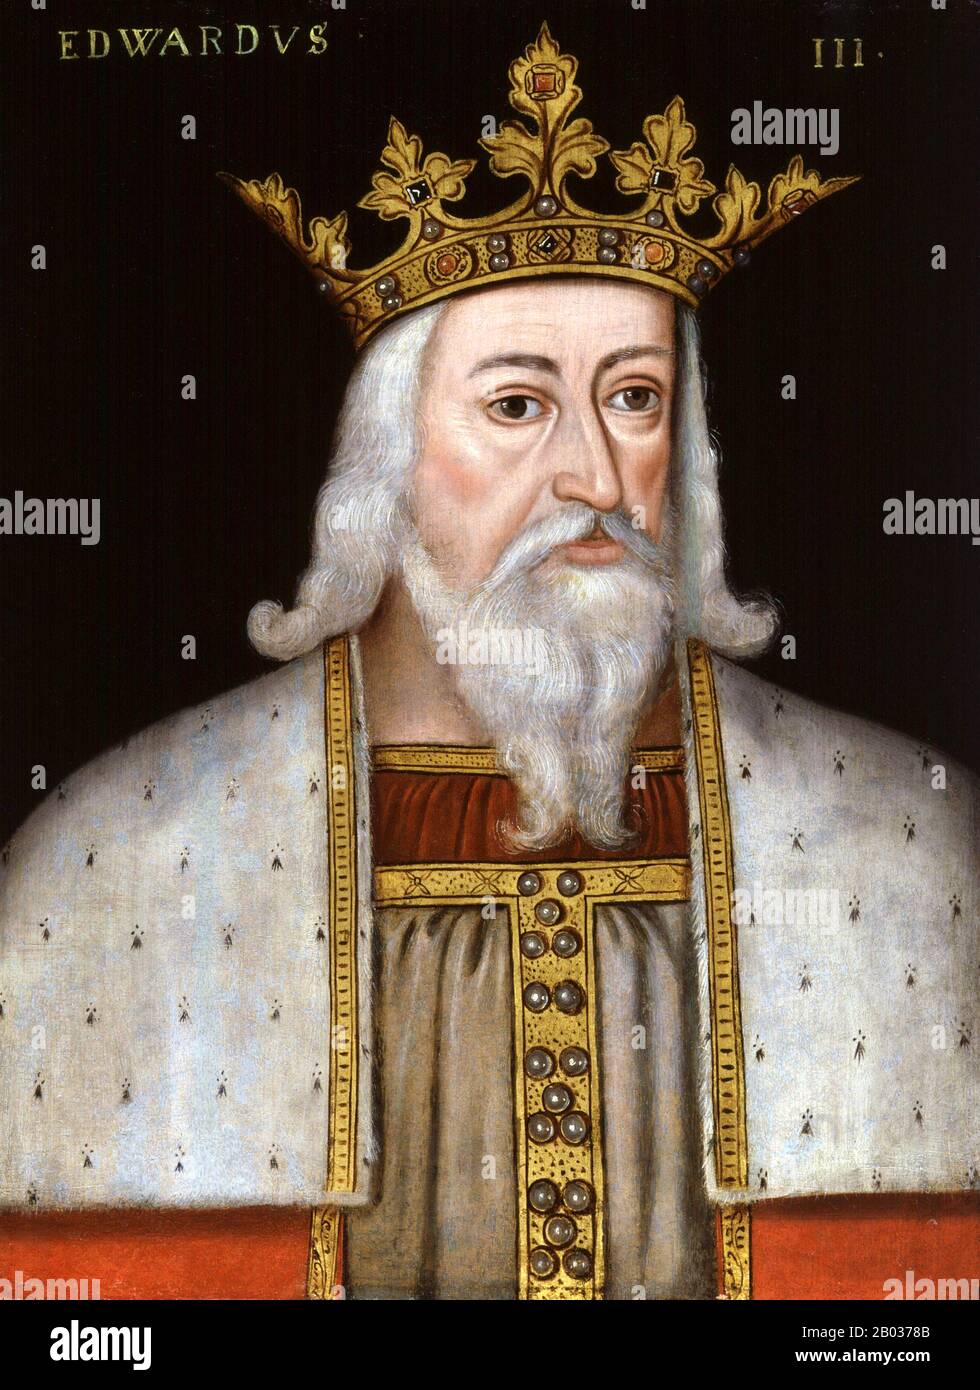 Edward III (13 November 1312 – 21 June 1377) was King of England from 25 January 1327 until his death; he is noted for his military success and for restoring royal authority after the disastrous and unorthodox reign of his father, Edward II. Edward III transformed the Kingdom of England into one of the most formidable military powers in Europe.  His long reign of fifty years was the second longest in medieval England and saw vital developments in legislation and government—in particular the evolution of the English parliament—as well as the ravages of the Black Death. Stock Photo